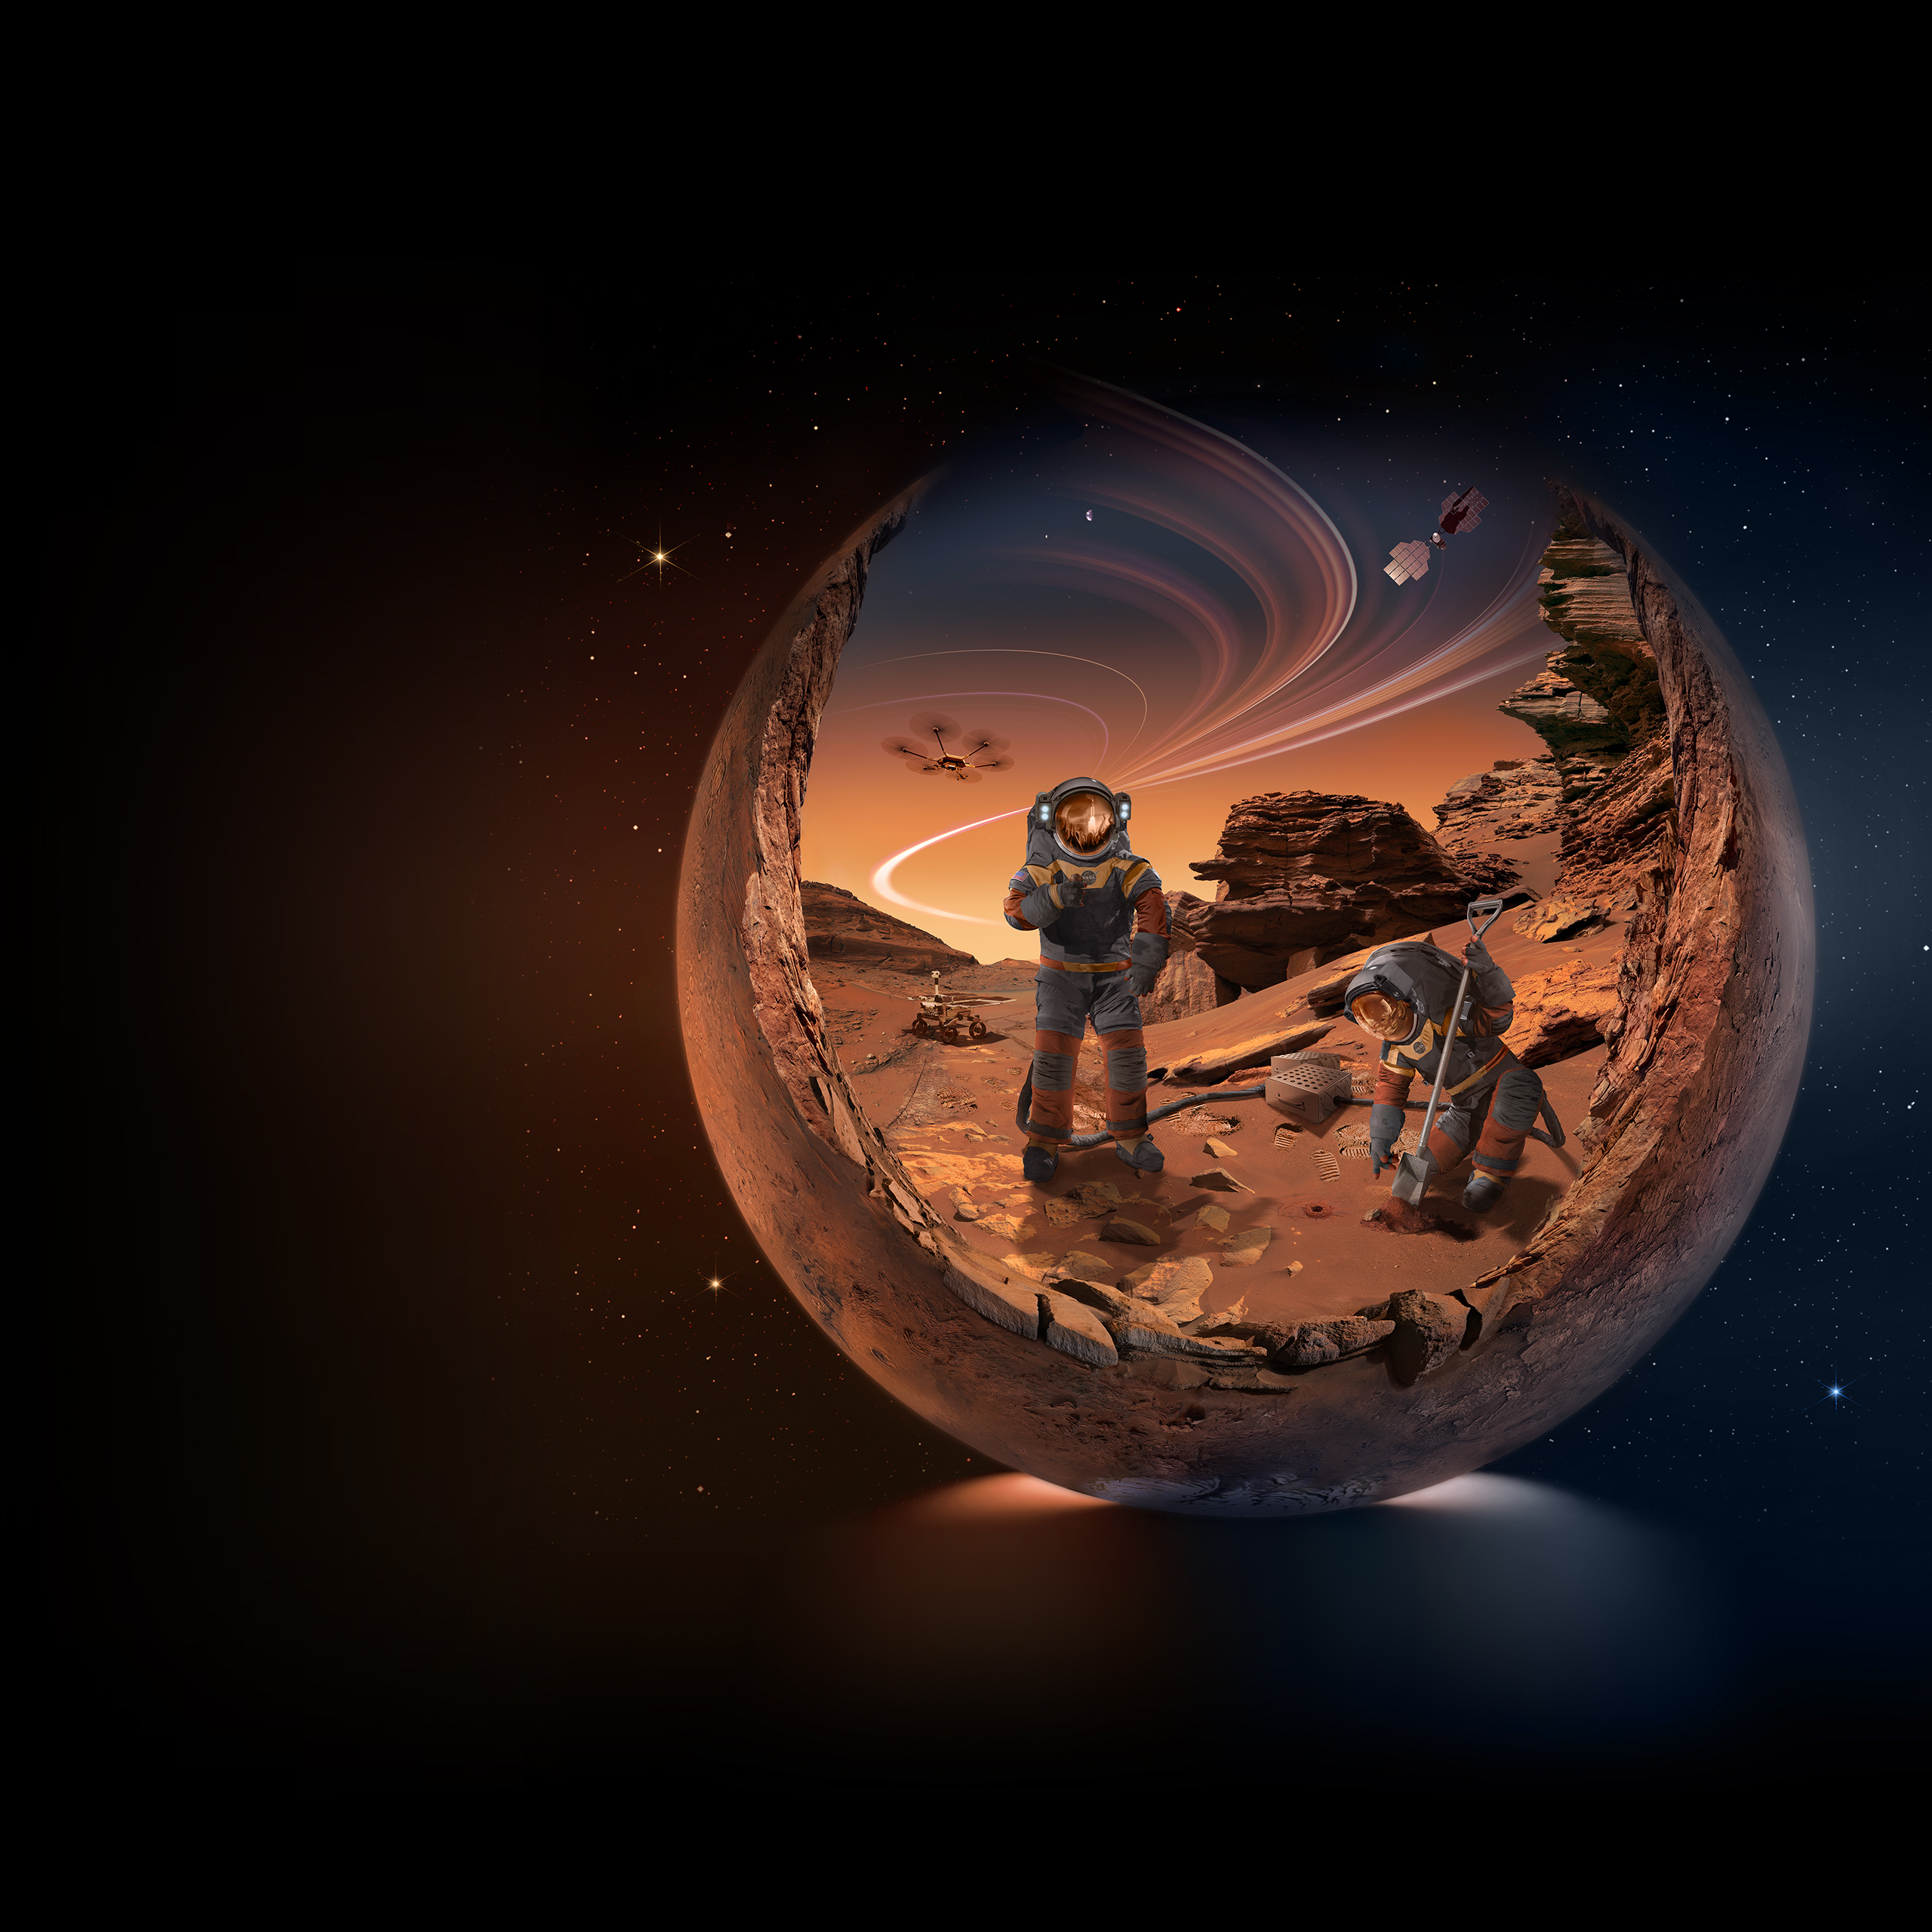 An artist’s concept – composed of rusty browns, reds, and dusky purples – depicting two Artemis astronauts collecting rock samples on Mars. The scene is surrounded by a spherical frame, which resembles the planet Mars on the outside, and forms the rocky cliffs of the Jezero Delta formation on the inside. The landscape is composited with real images captured by NASA’s Perseverance Rover in June of 2022. In the right foreground an astronaut kneels, using a shovel to dig up soil samples. On left, the other astronaut stands, holding a rock sample in their left hand. The Artemis 1 launch can be seen reflected in the helmets visor. Behind them at left, a rover explores the surrounding area, leaving tracks in the sand. In the sky, a trajectory leads upward, curving around from right to left, then dividing into various paths at top. These paths represent the many past and future missions to visit the red planet. A futuristic Mars helicopter drone hovers in the sky on the left, and a satellite passes over in the upper right. The spherical scene is surrounded by space and stars.